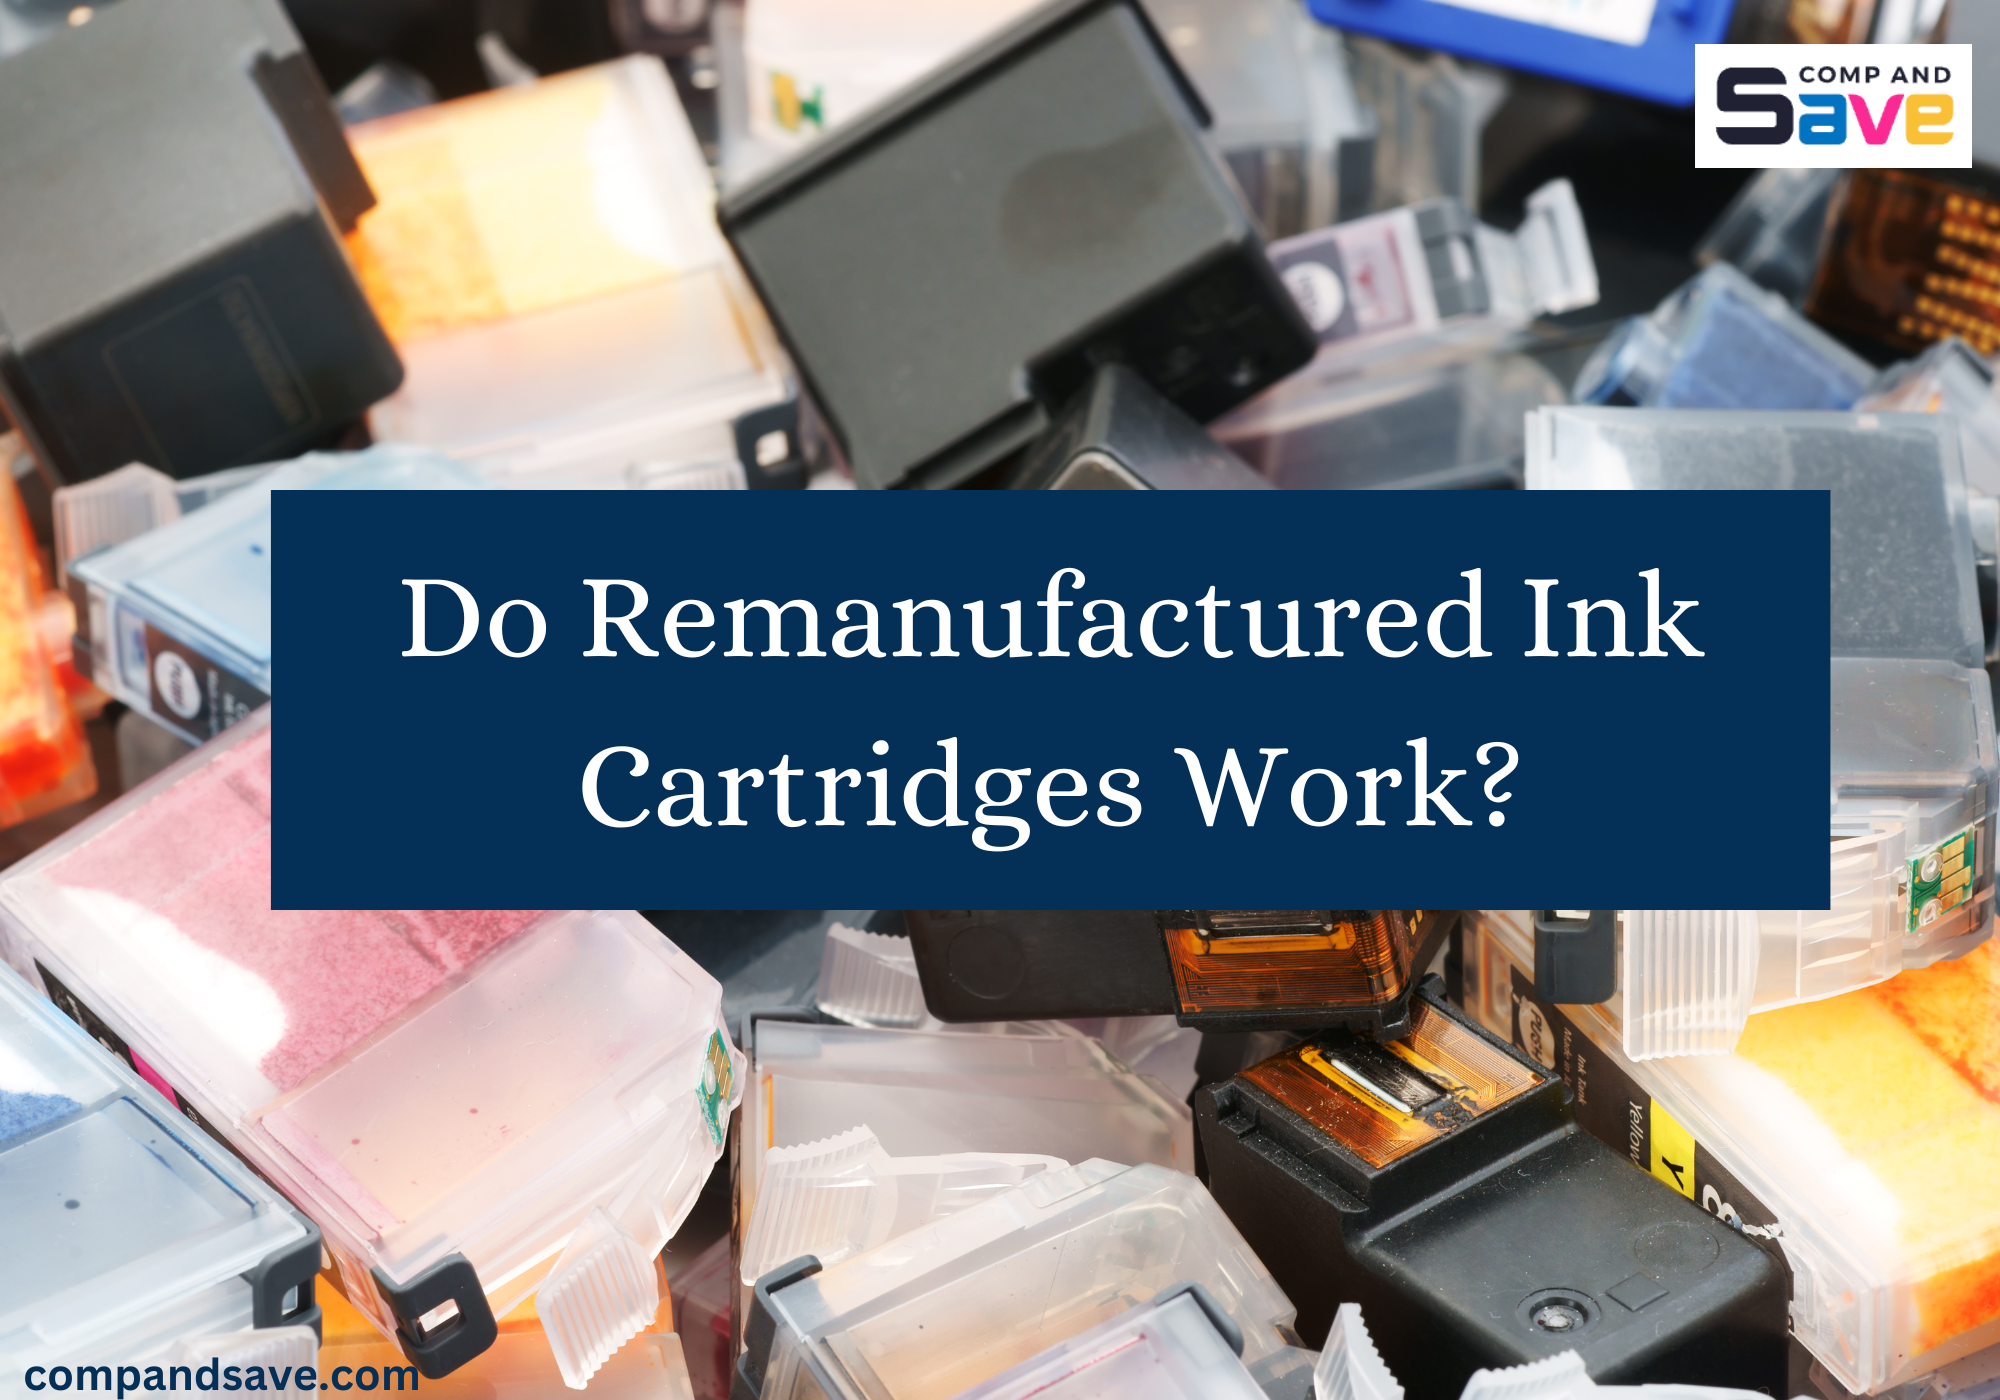 image from Do Remanufactured Ink Cartridges Work?